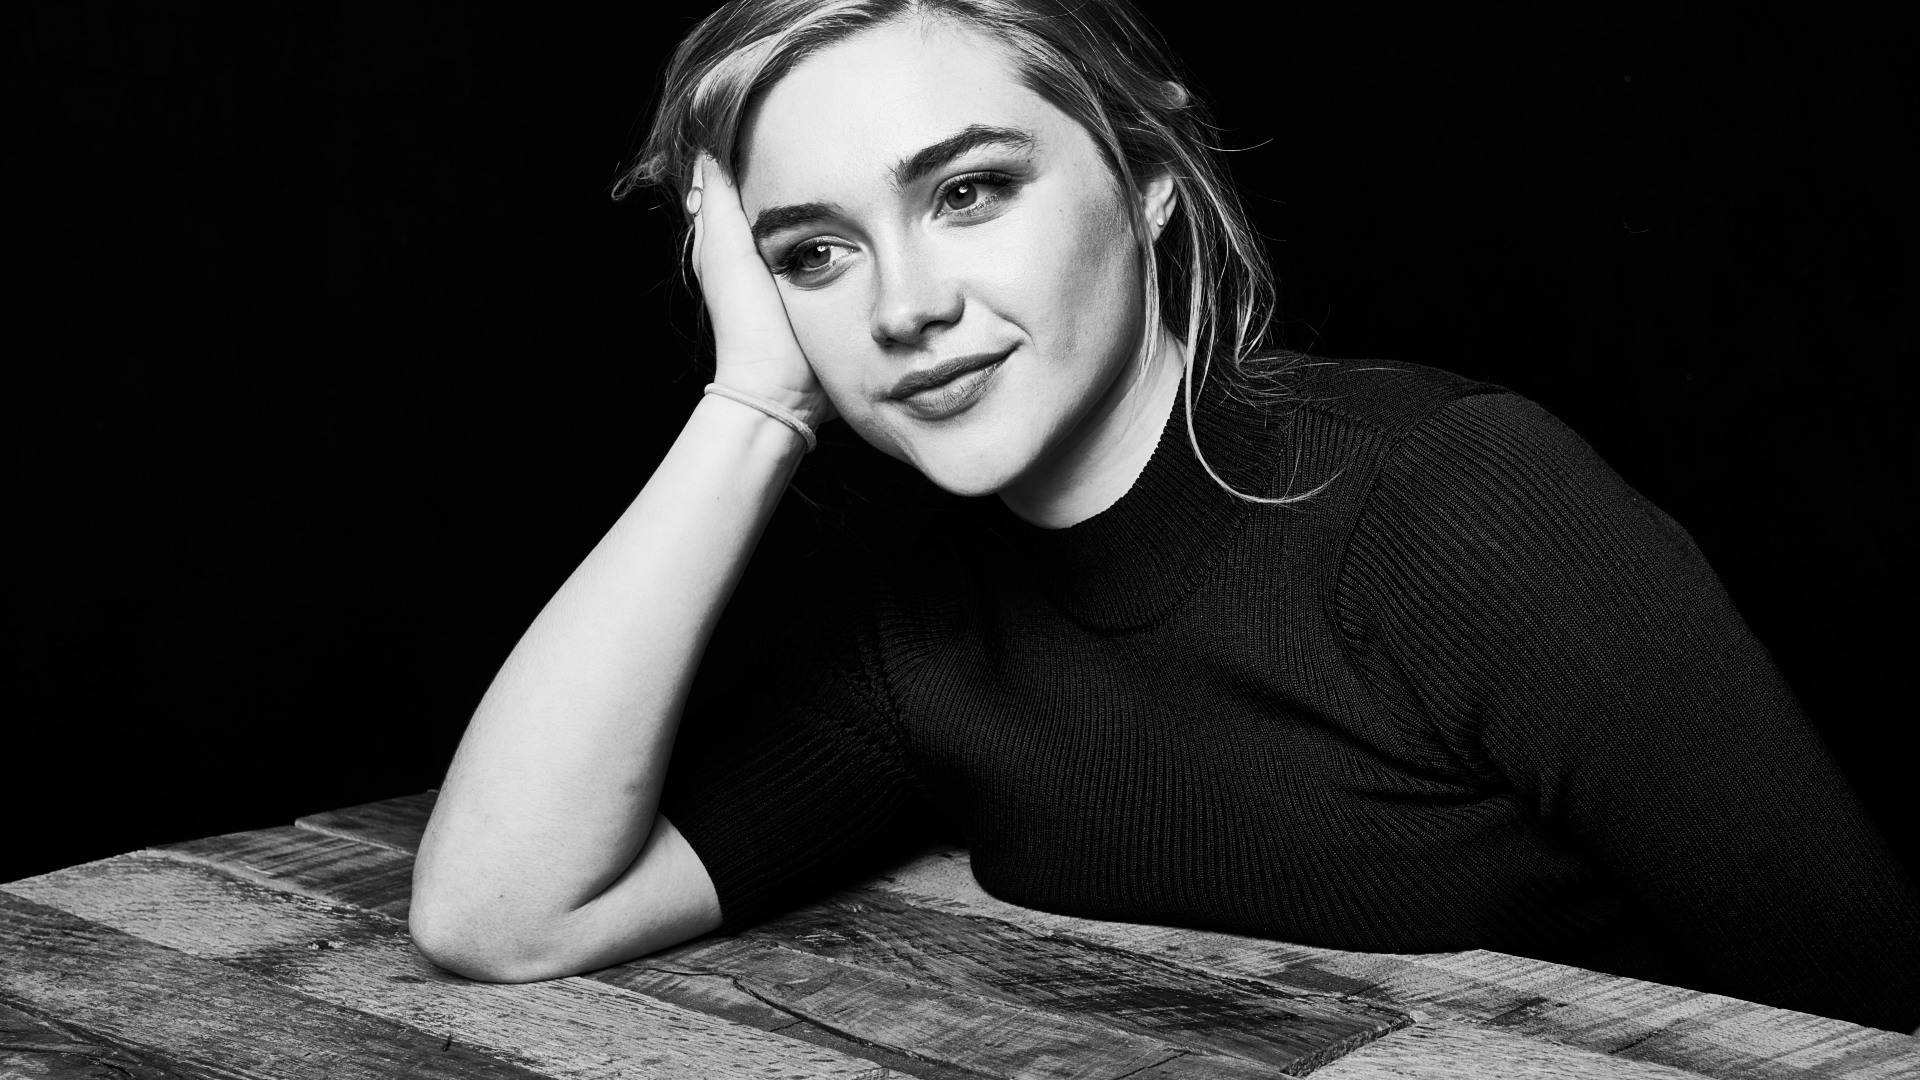 A black and white photo of a woman with her head resting on her hand, looking at the camera. - Florence Pugh